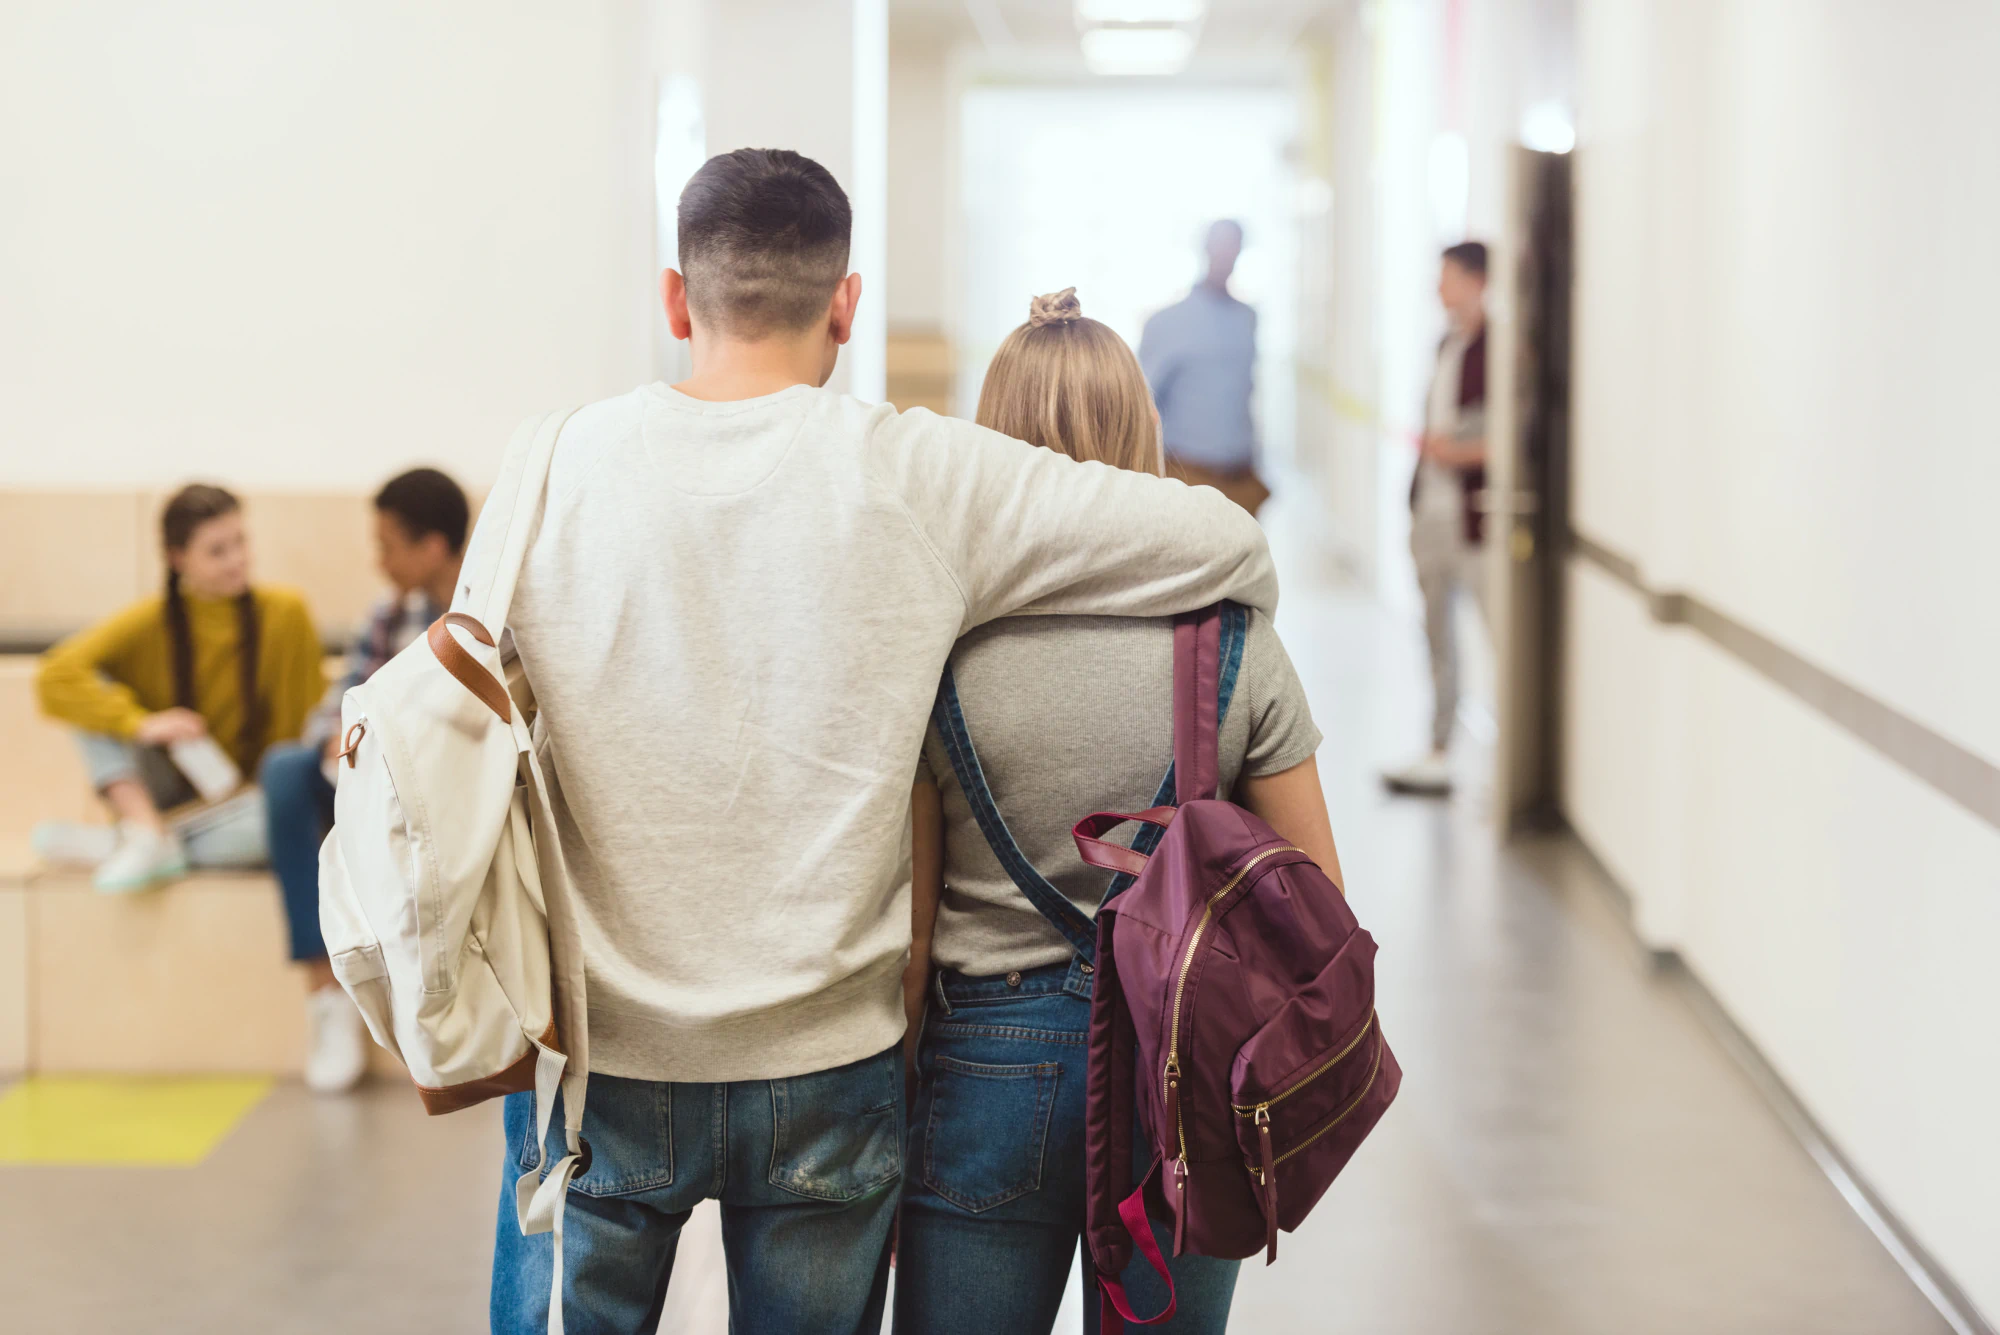 Student couple walking at school with their backpacks on, the man with his arm around the girl.